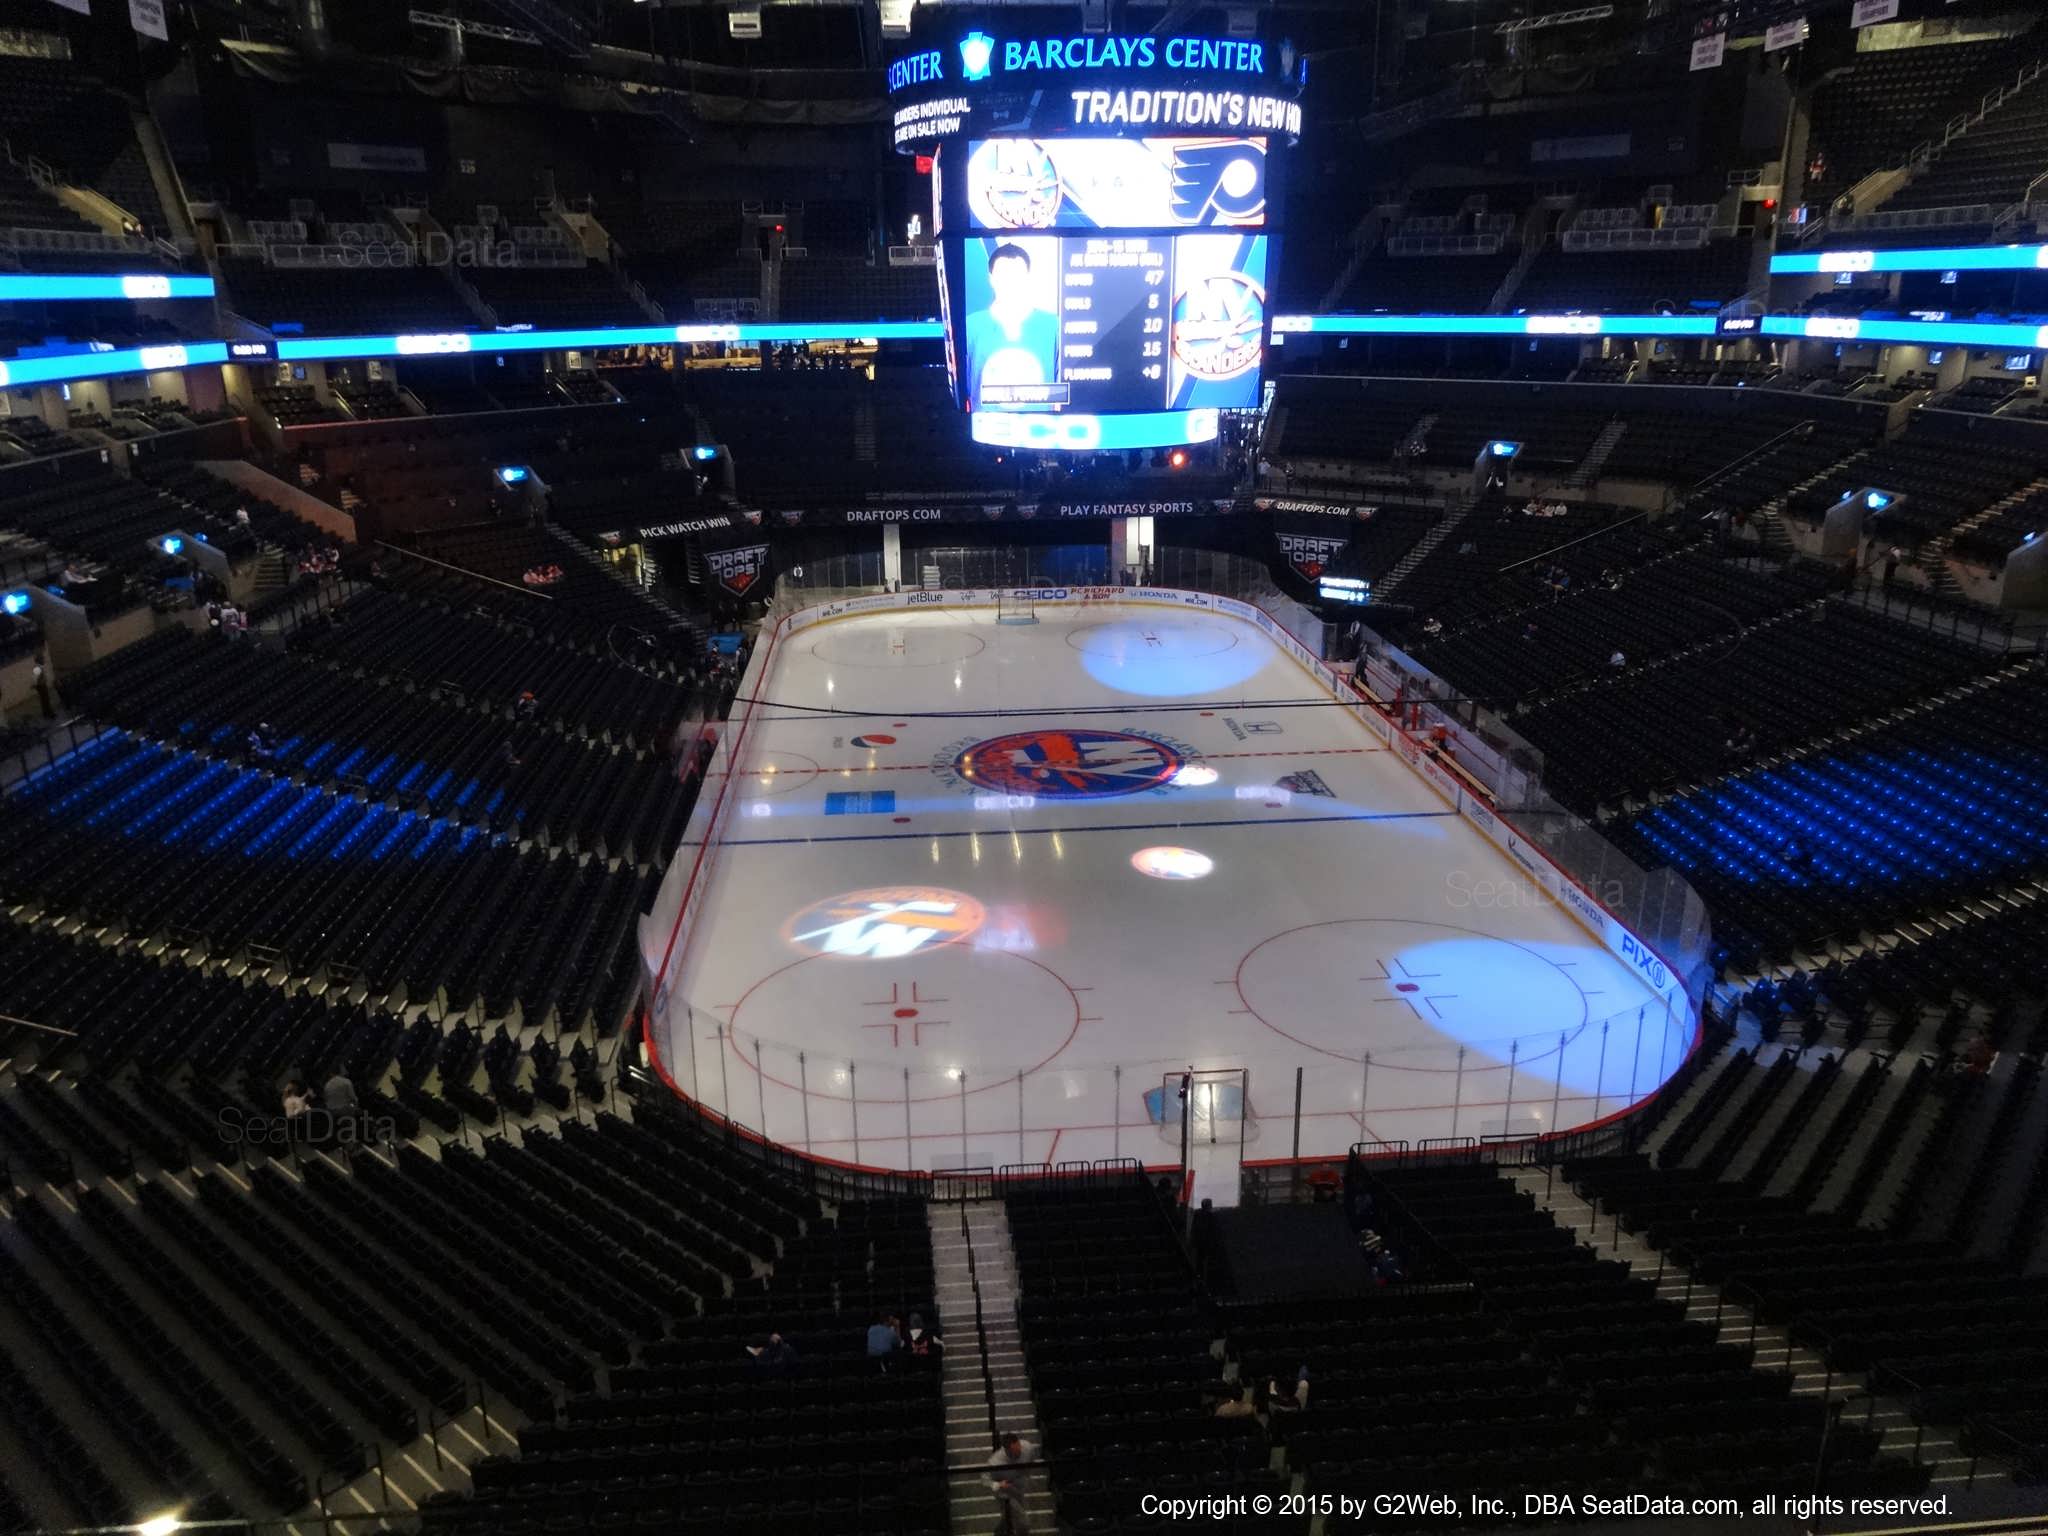 Seat View from Section 217 at the Barclays Center, home of the New York Islanders